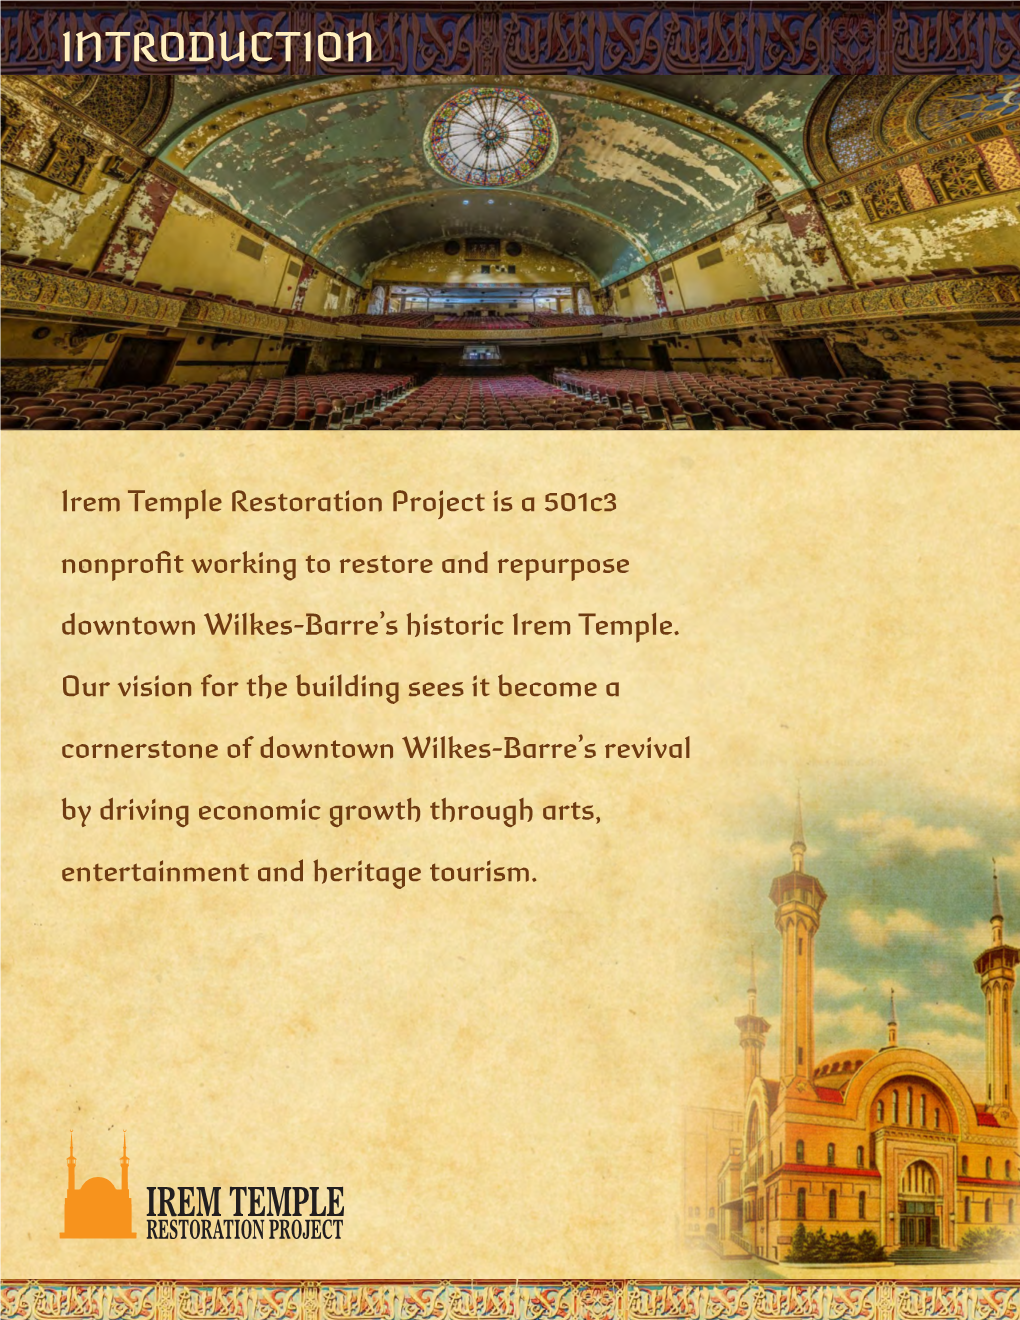 Irem Temple Restoration Project Is a 501C3 Nonprofit Working to Restore and Repurpose Downtown Wilkes-Barre’S Historic Irem Temple